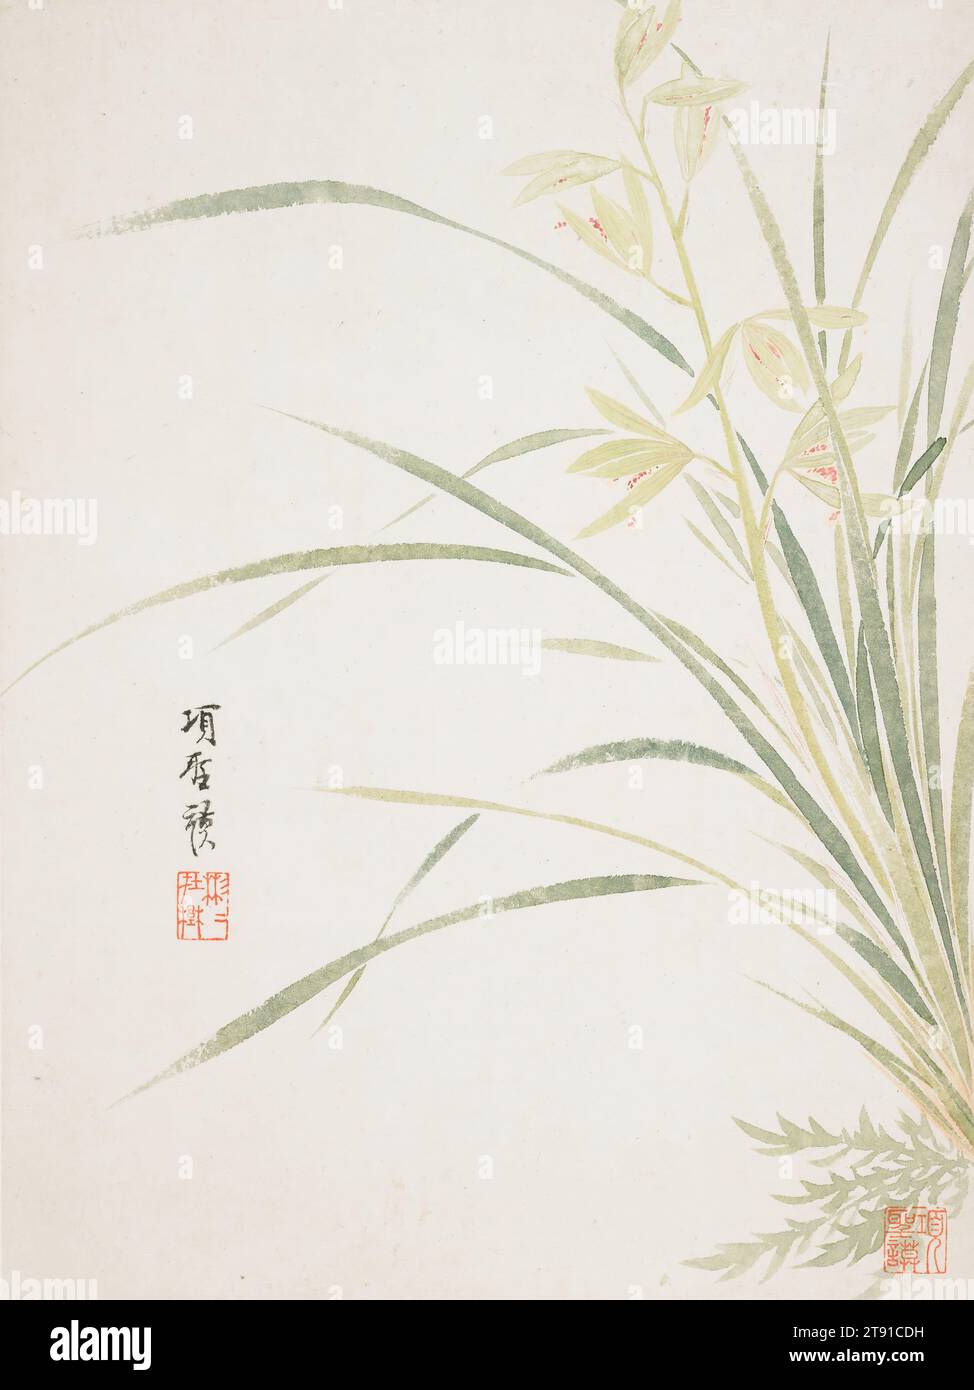 Epidendrum Blossom from a Flower Album of Ten Leaves, 1656, Xiang Shengmo, Chinese, 1597-1658, 12 1/8 x 9 1/16 in. (30.8 x 23 cm), Ink and color on paper, China, 17th century Stock Photo